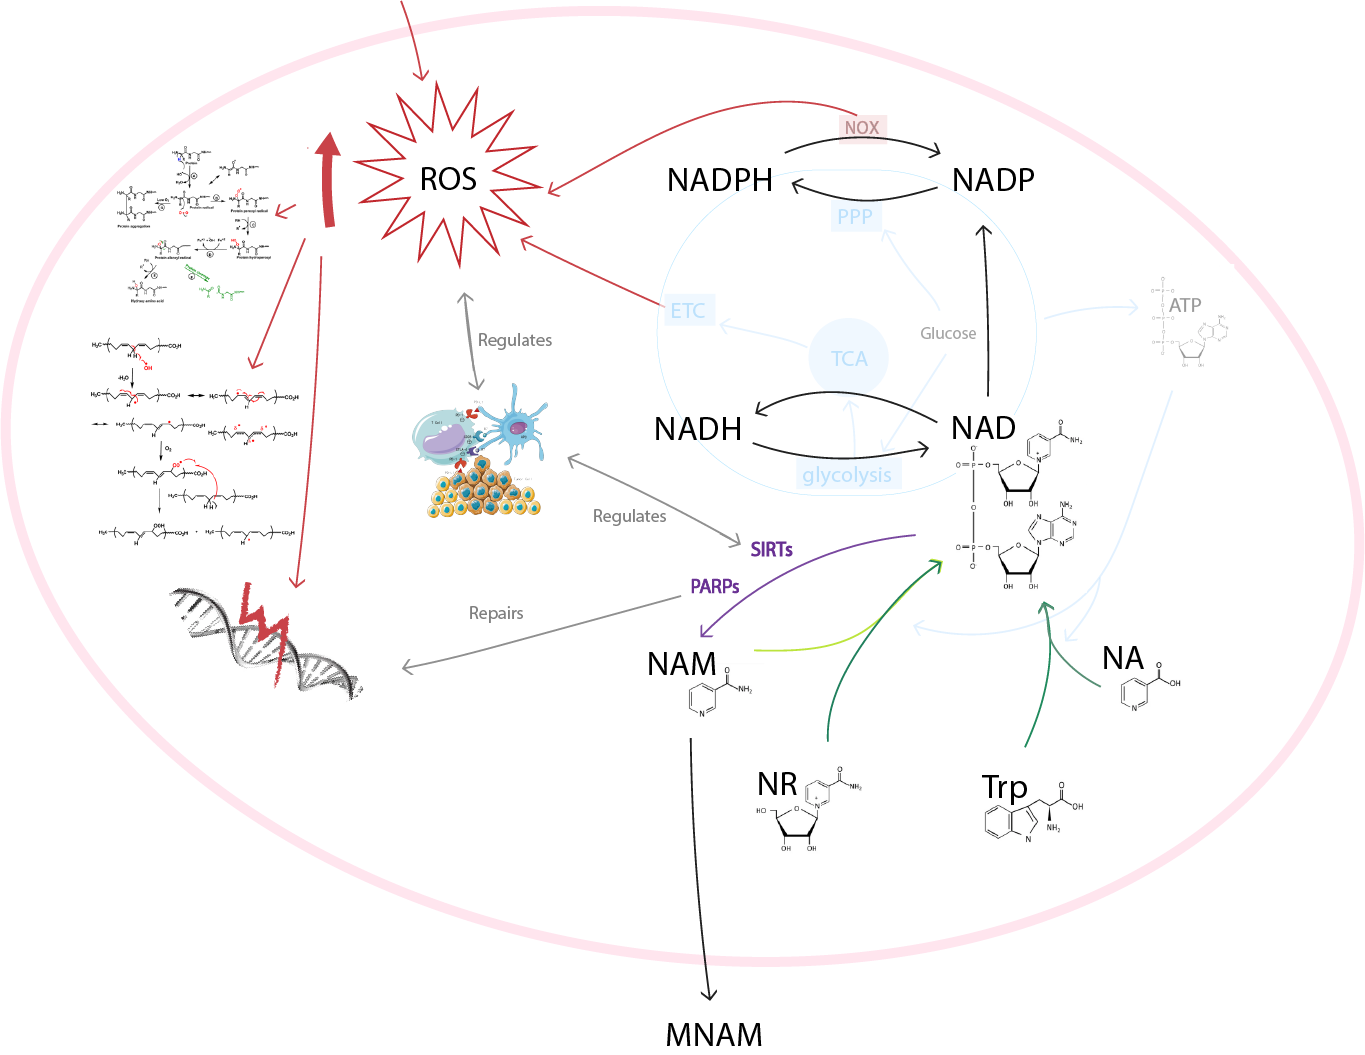 linking NAD metabolism and oxidative stress